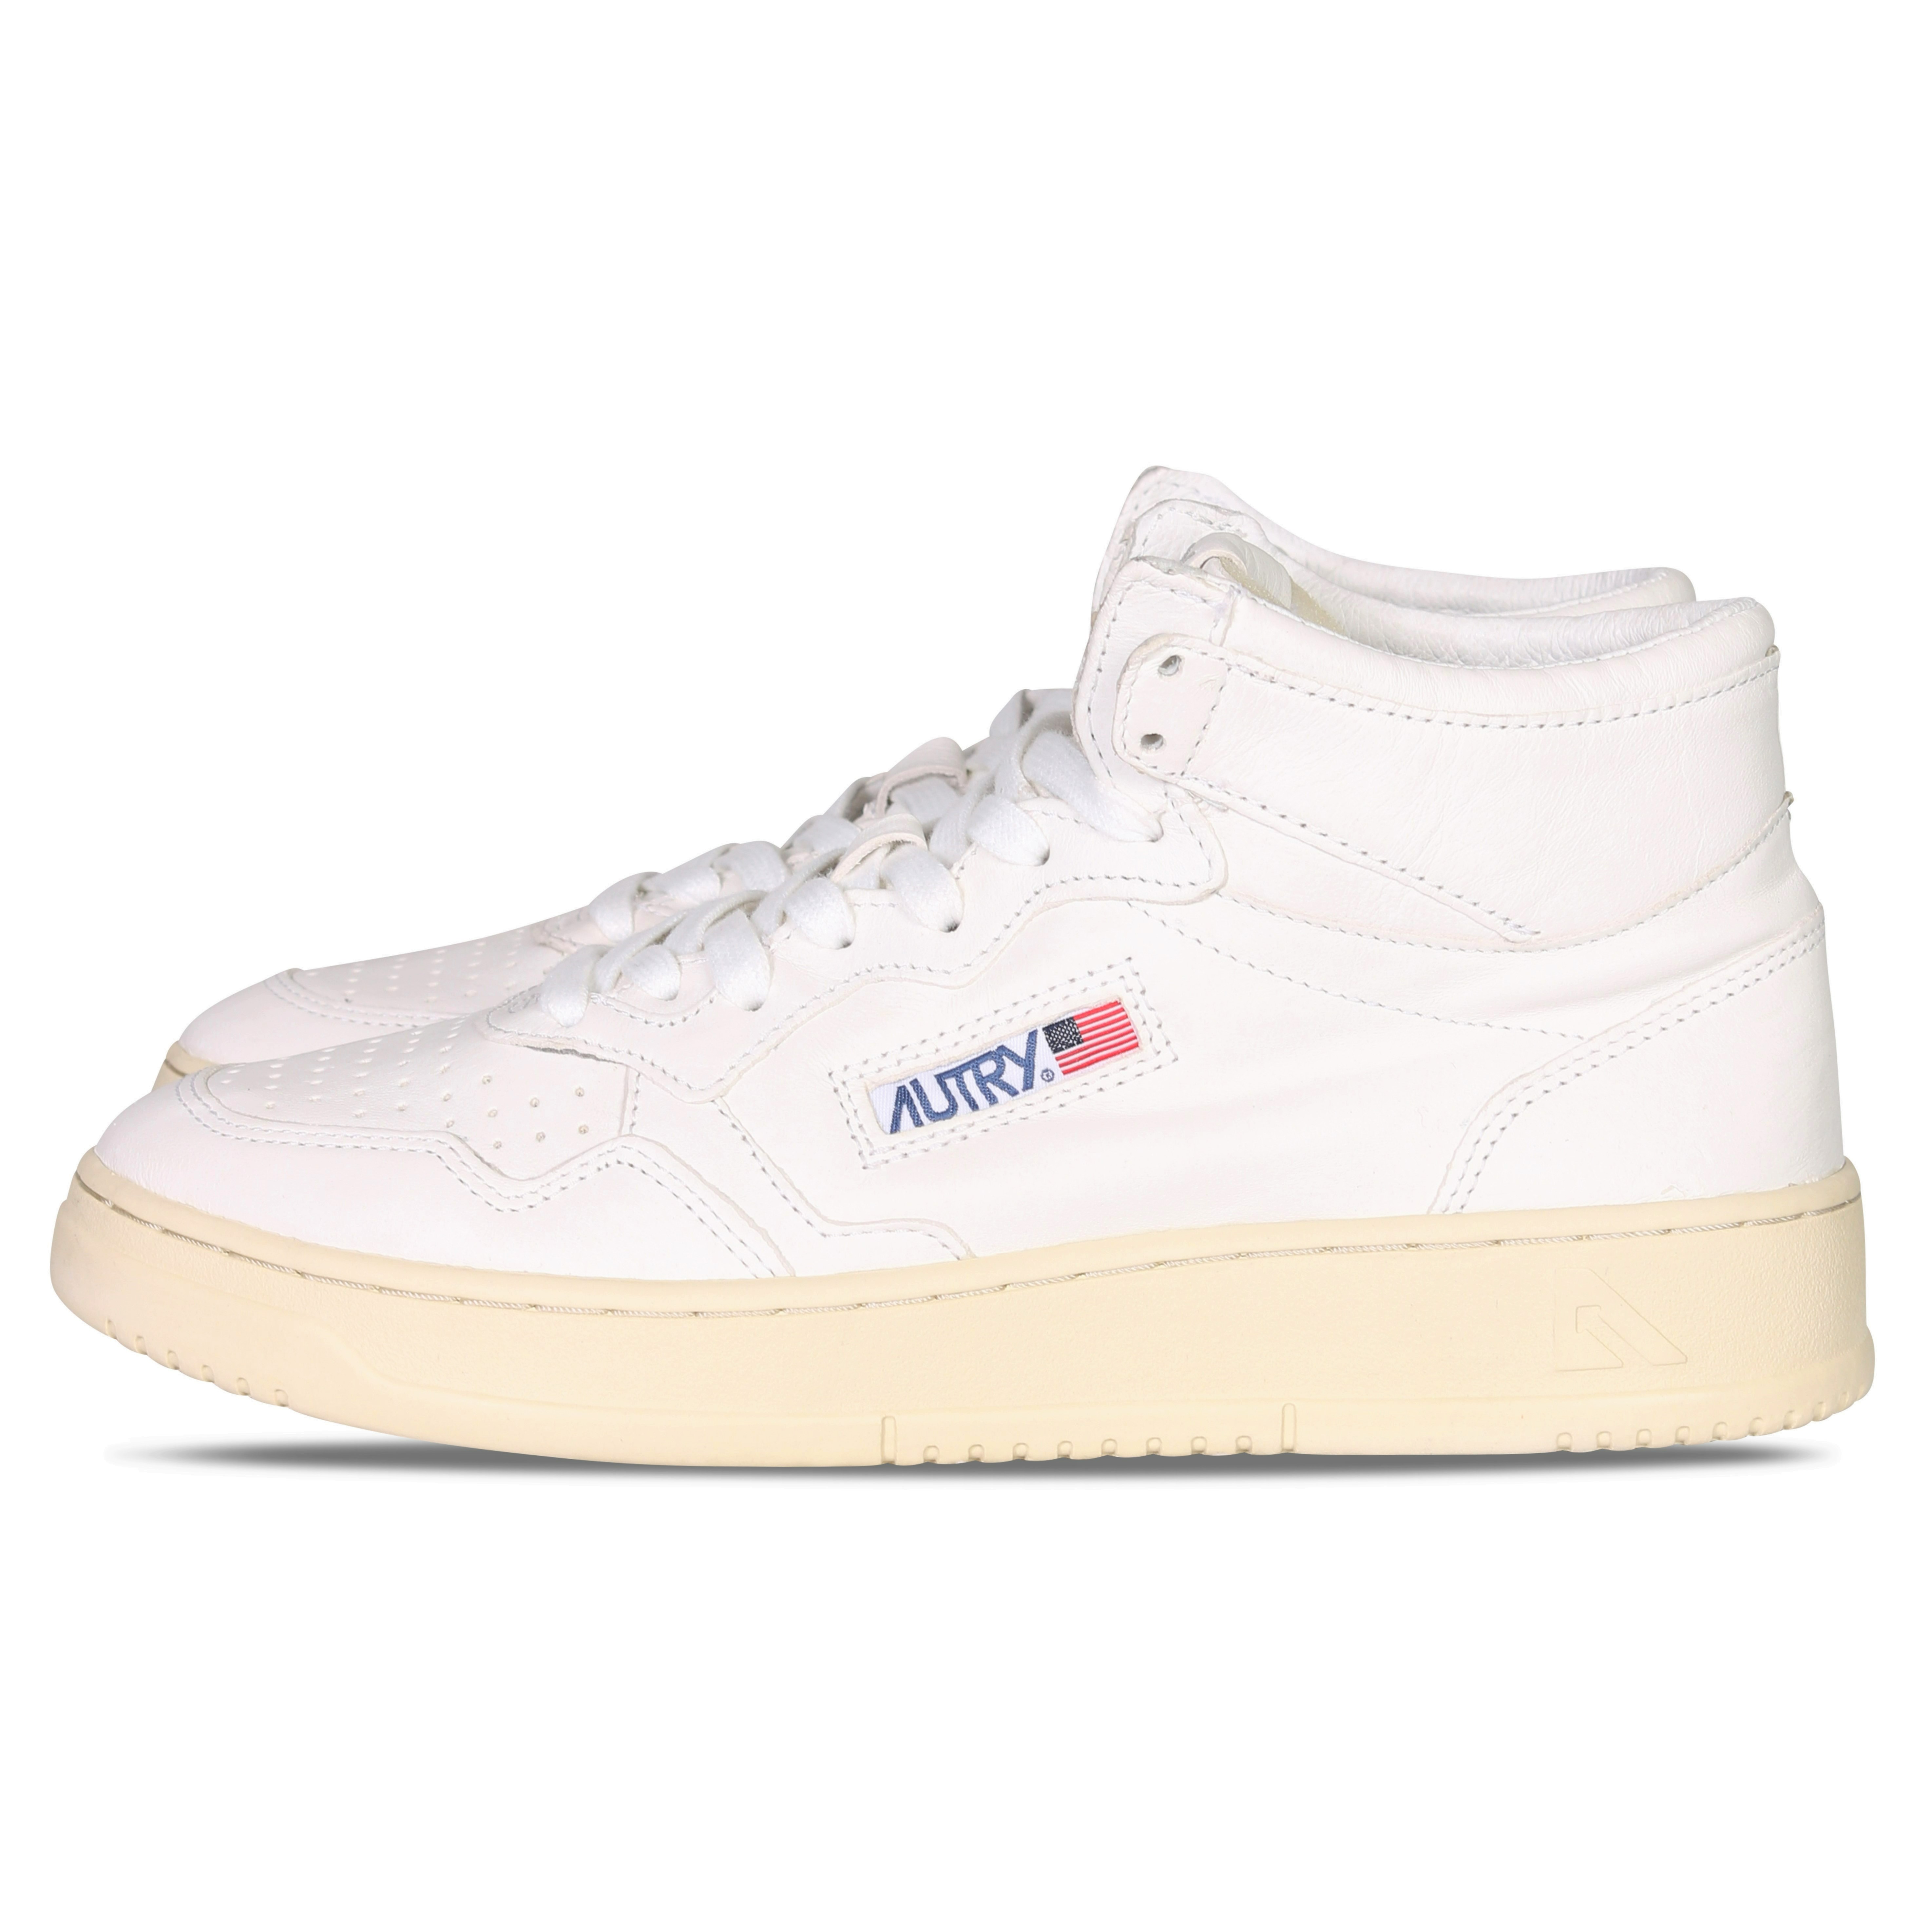 Autry Action Shoes Medalist Mid Sneaker Goat White